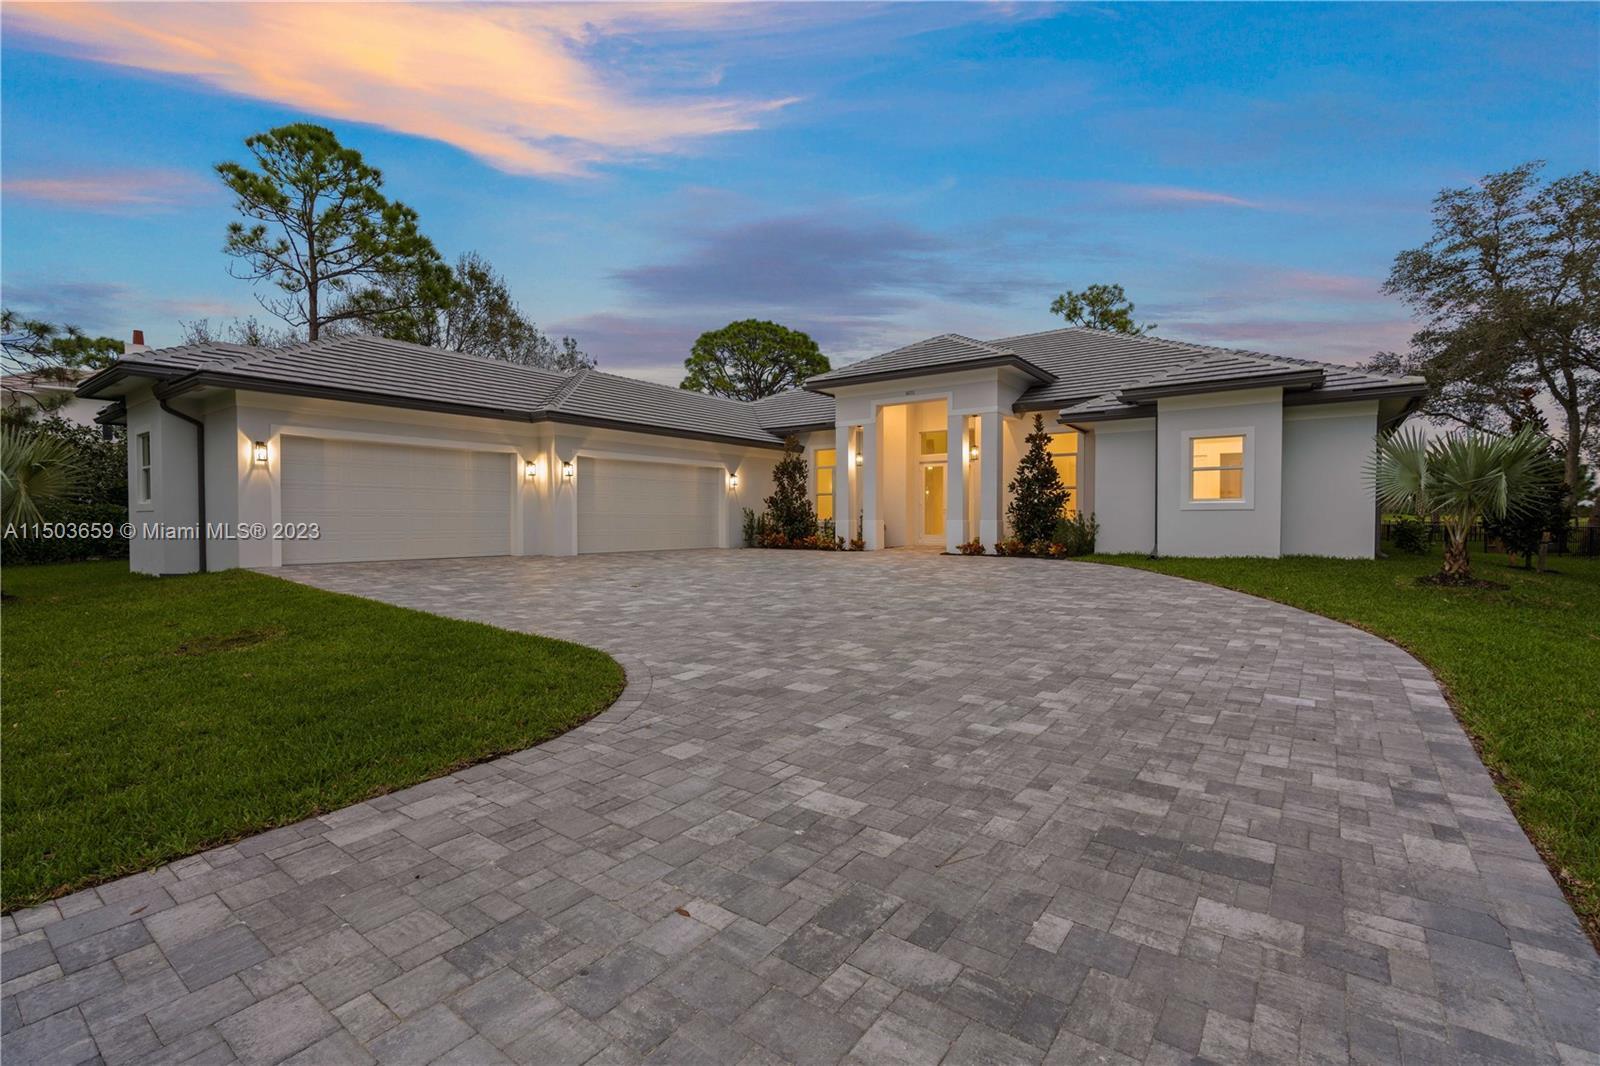 STUNNING new construction golf course home in Jupiter's desirable Old Trail community, within Ranch 